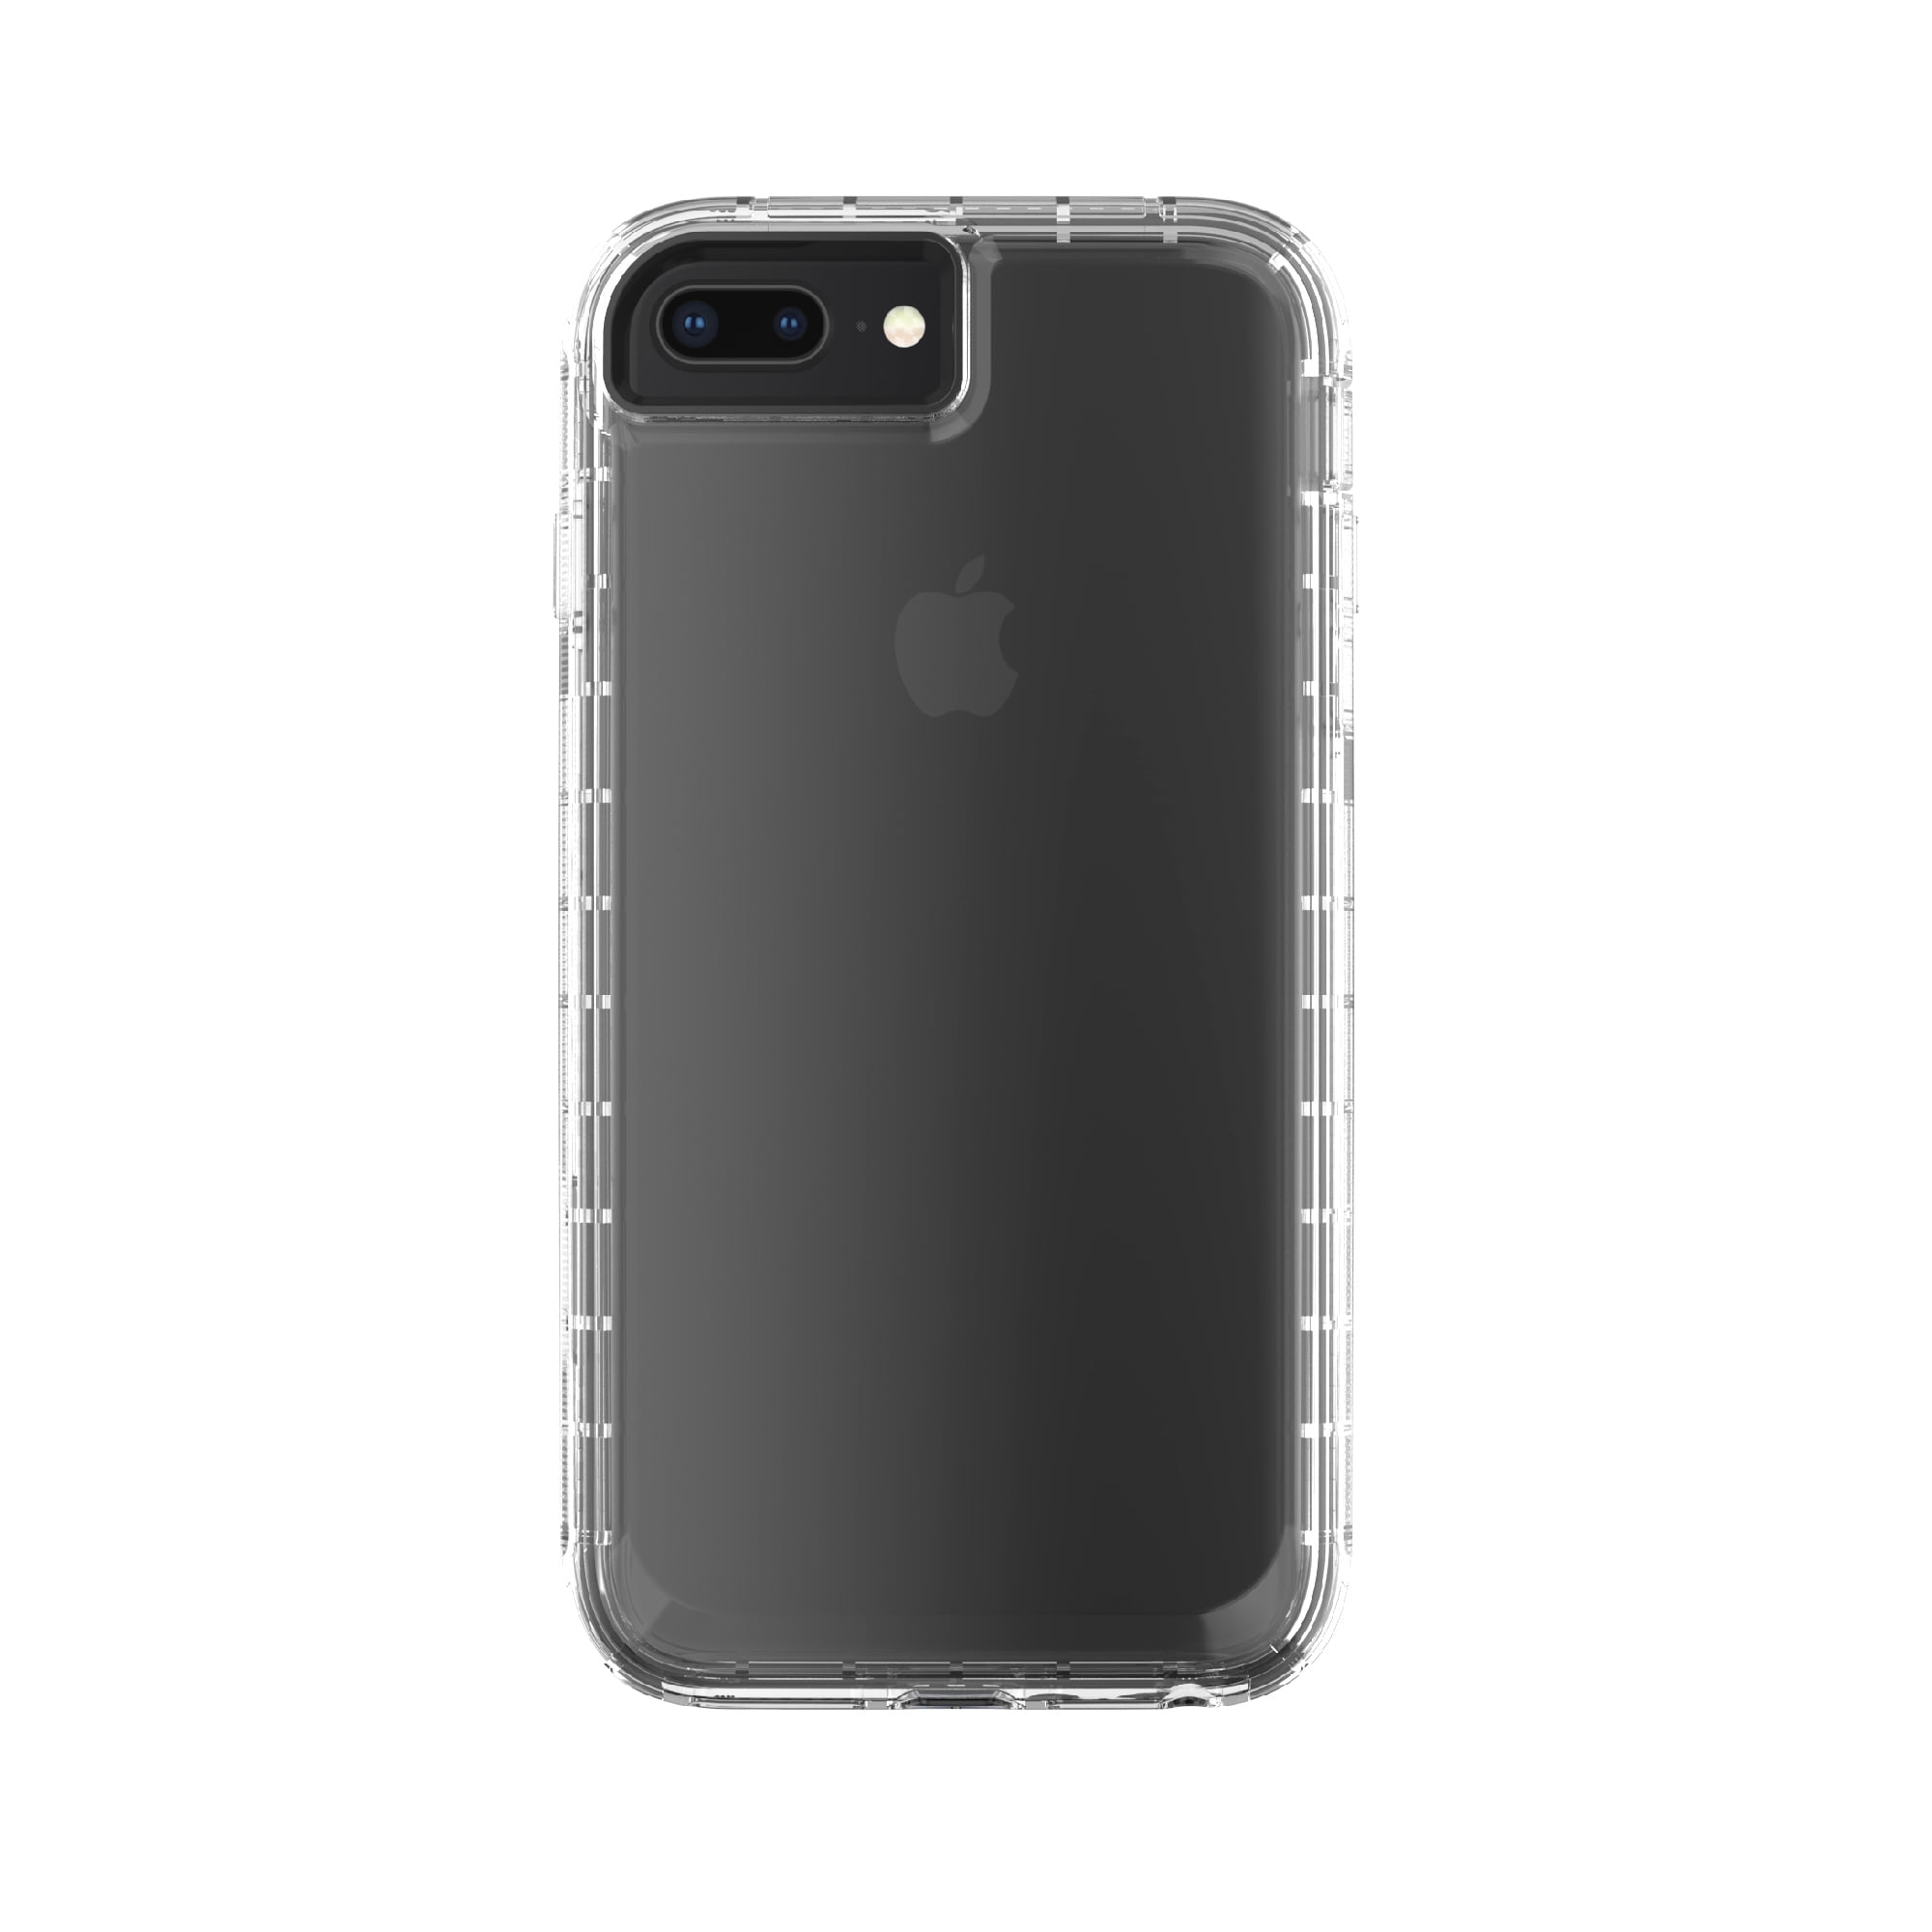 onn. Rugged Phone Case for iPhone 6 Plus, 7 Plus, 8 Plus, Clear